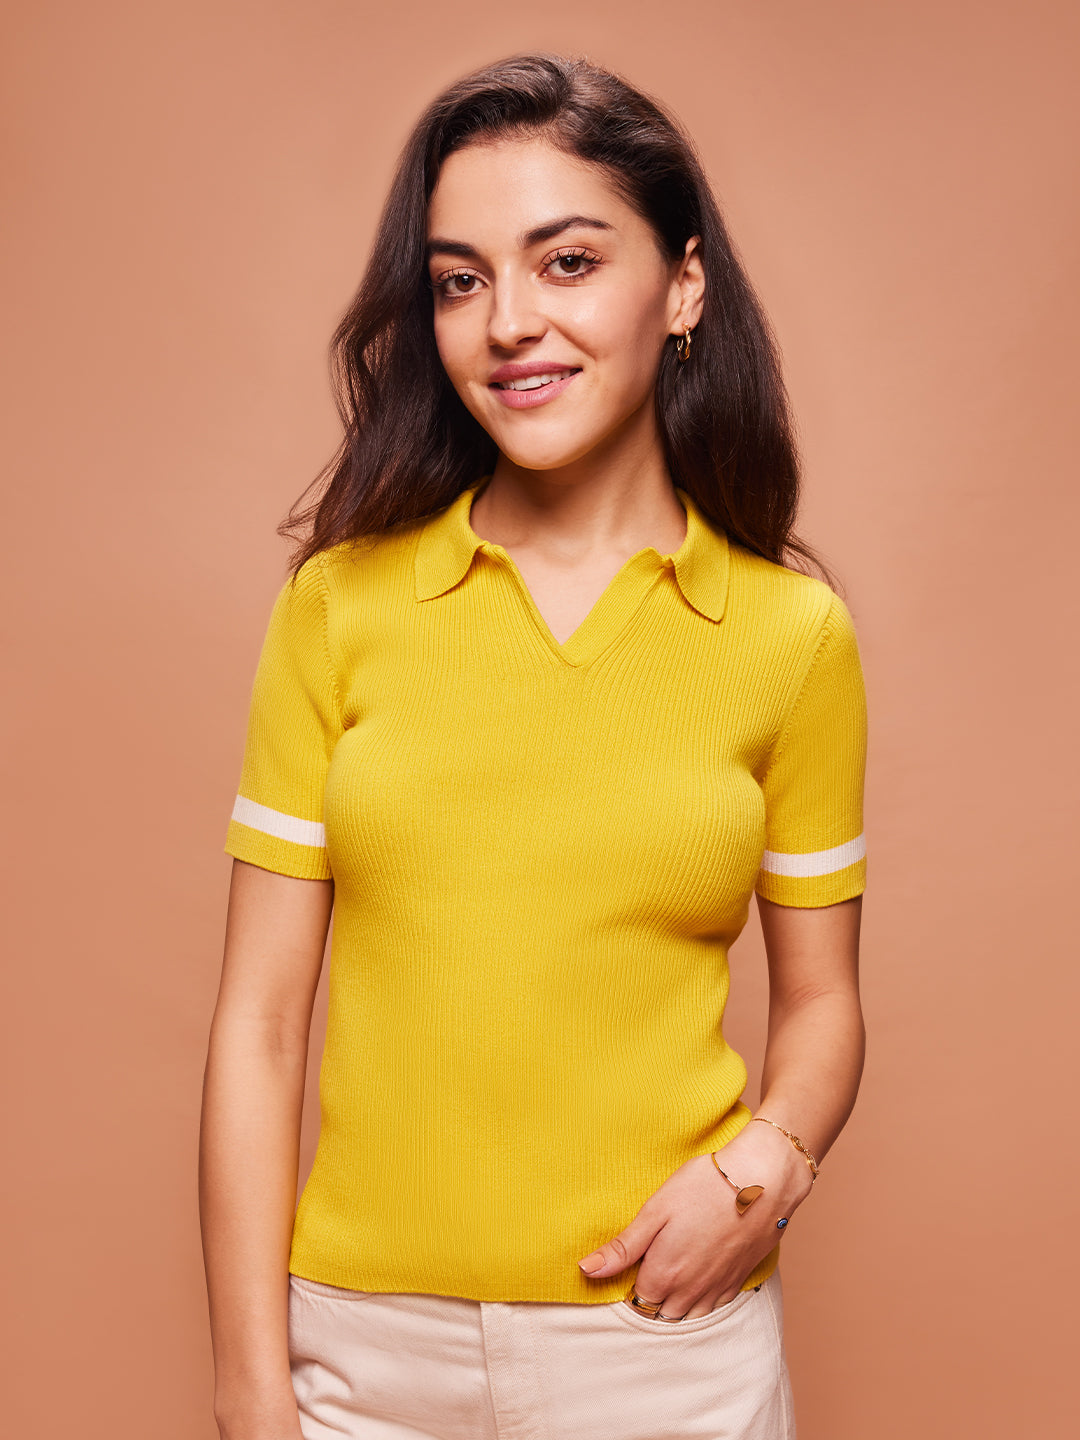 Bombay High Women's Yellow & White Premium Cotton Blend Solid Ribbed Collar Polo T-Shirt